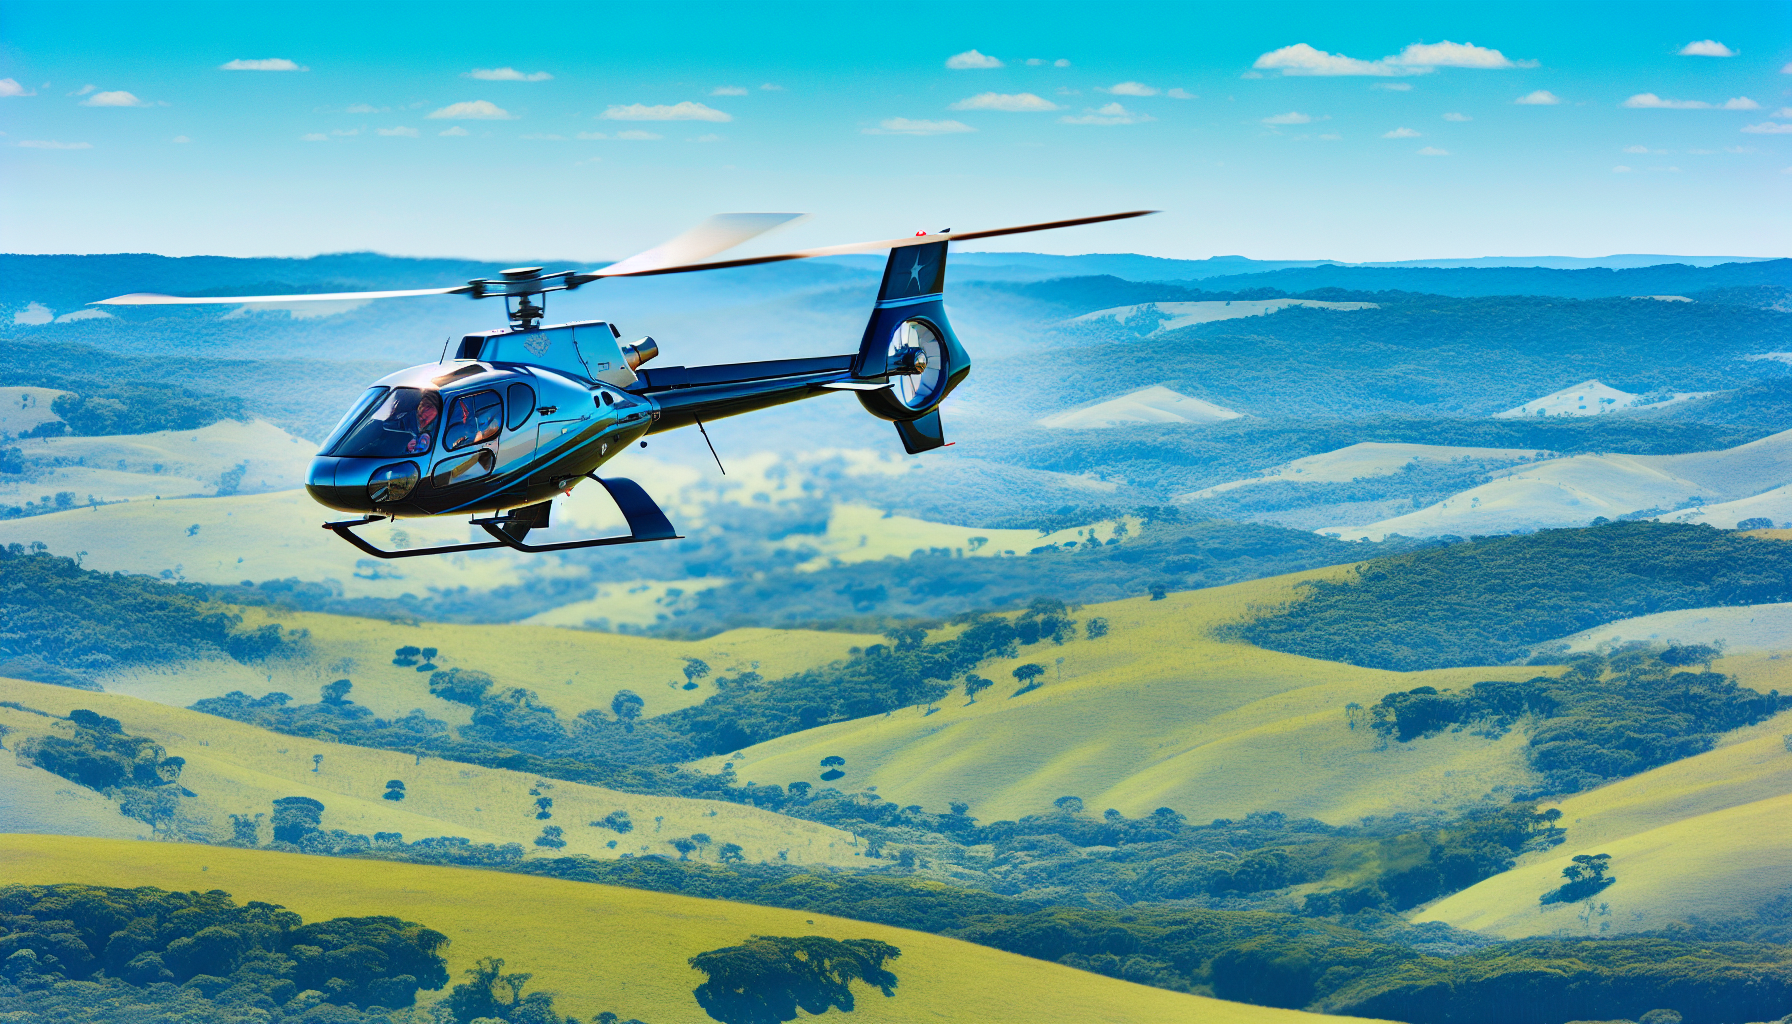 Helicopter flying over scenic landscape